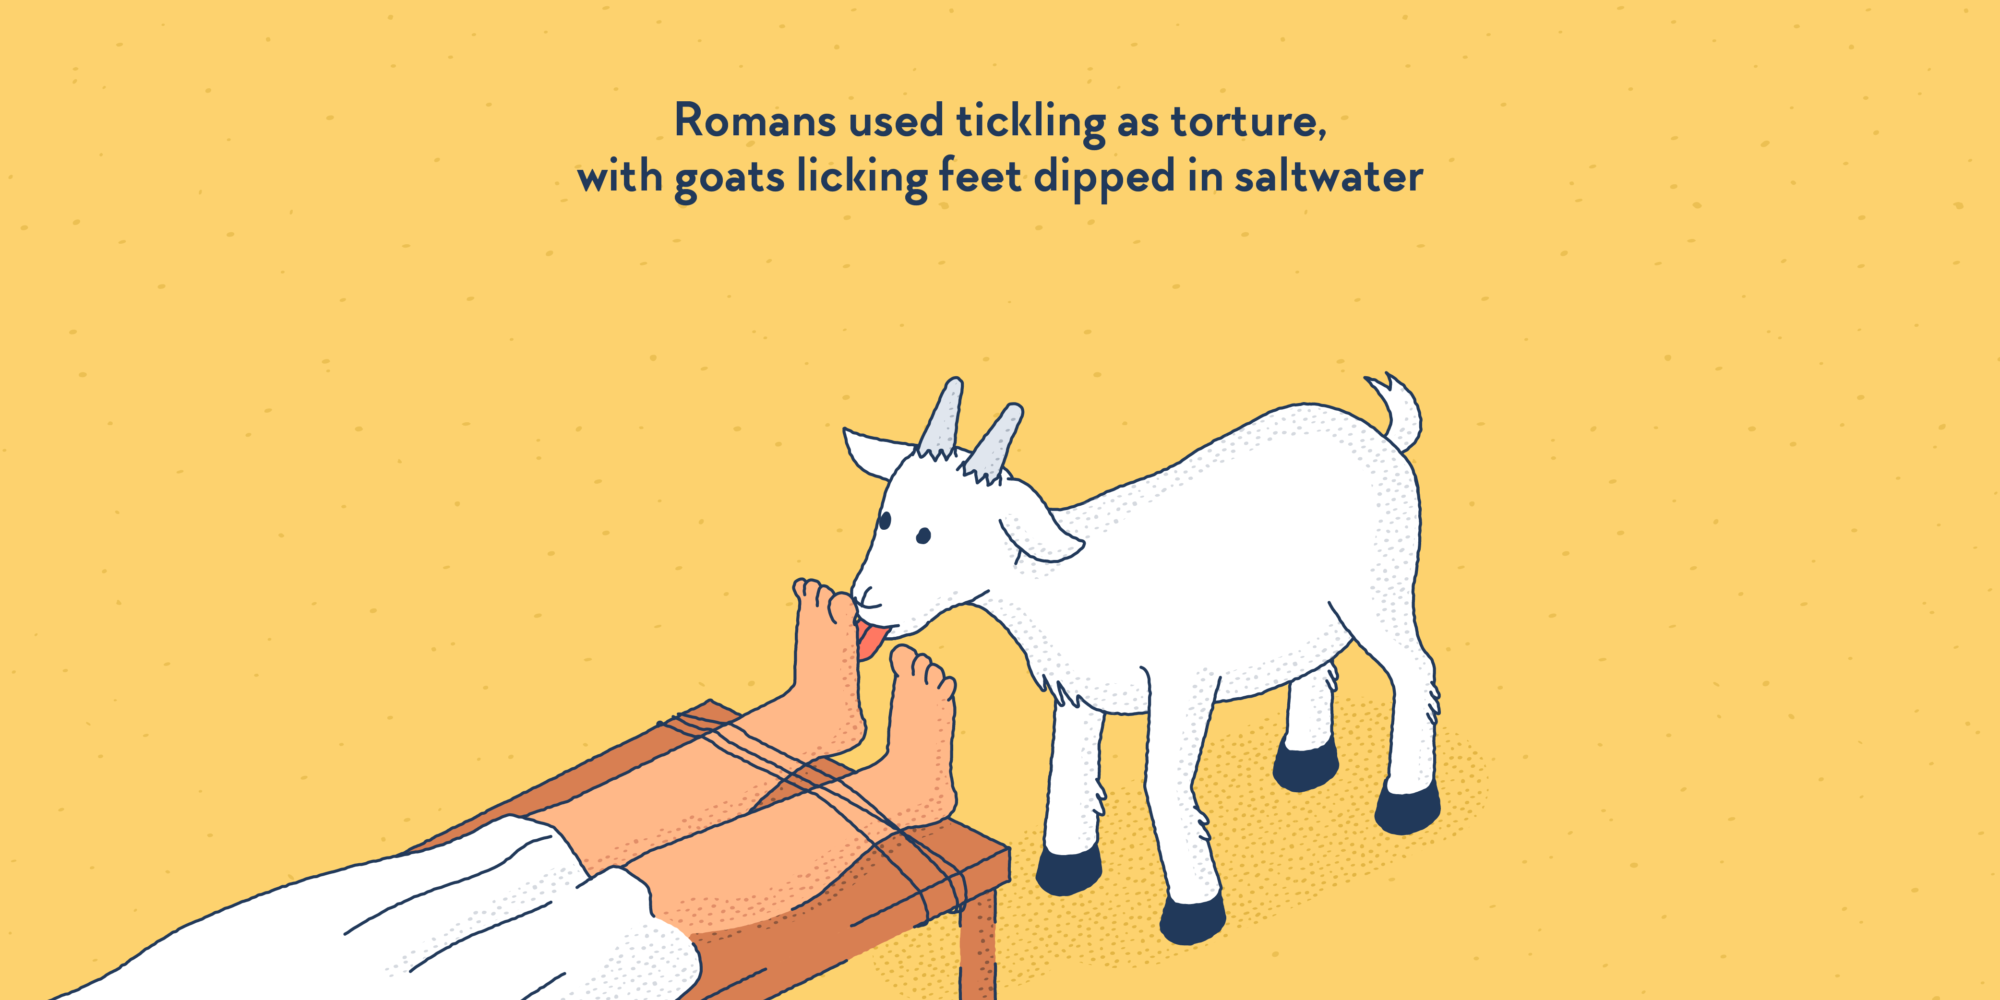 A goat licking the feet of a person tied lying down.